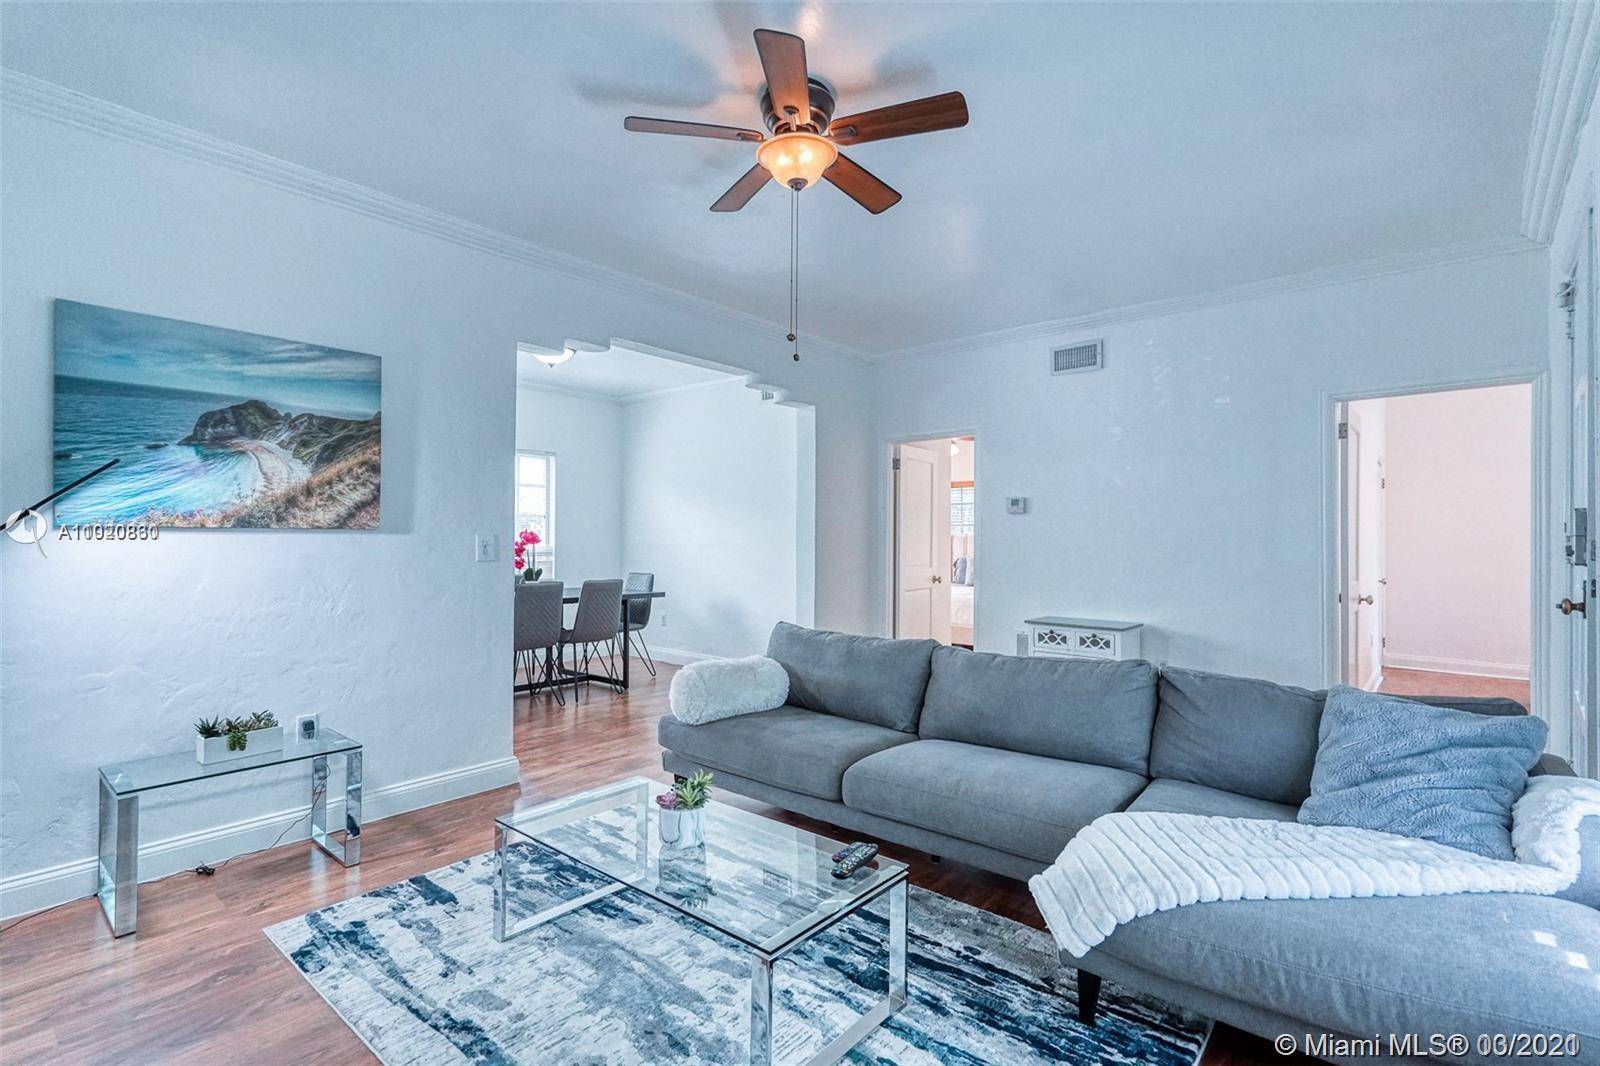 Beautiful Furnished Miami Beach 2 Bedroom apartment, very spacious over 1000 square feet.